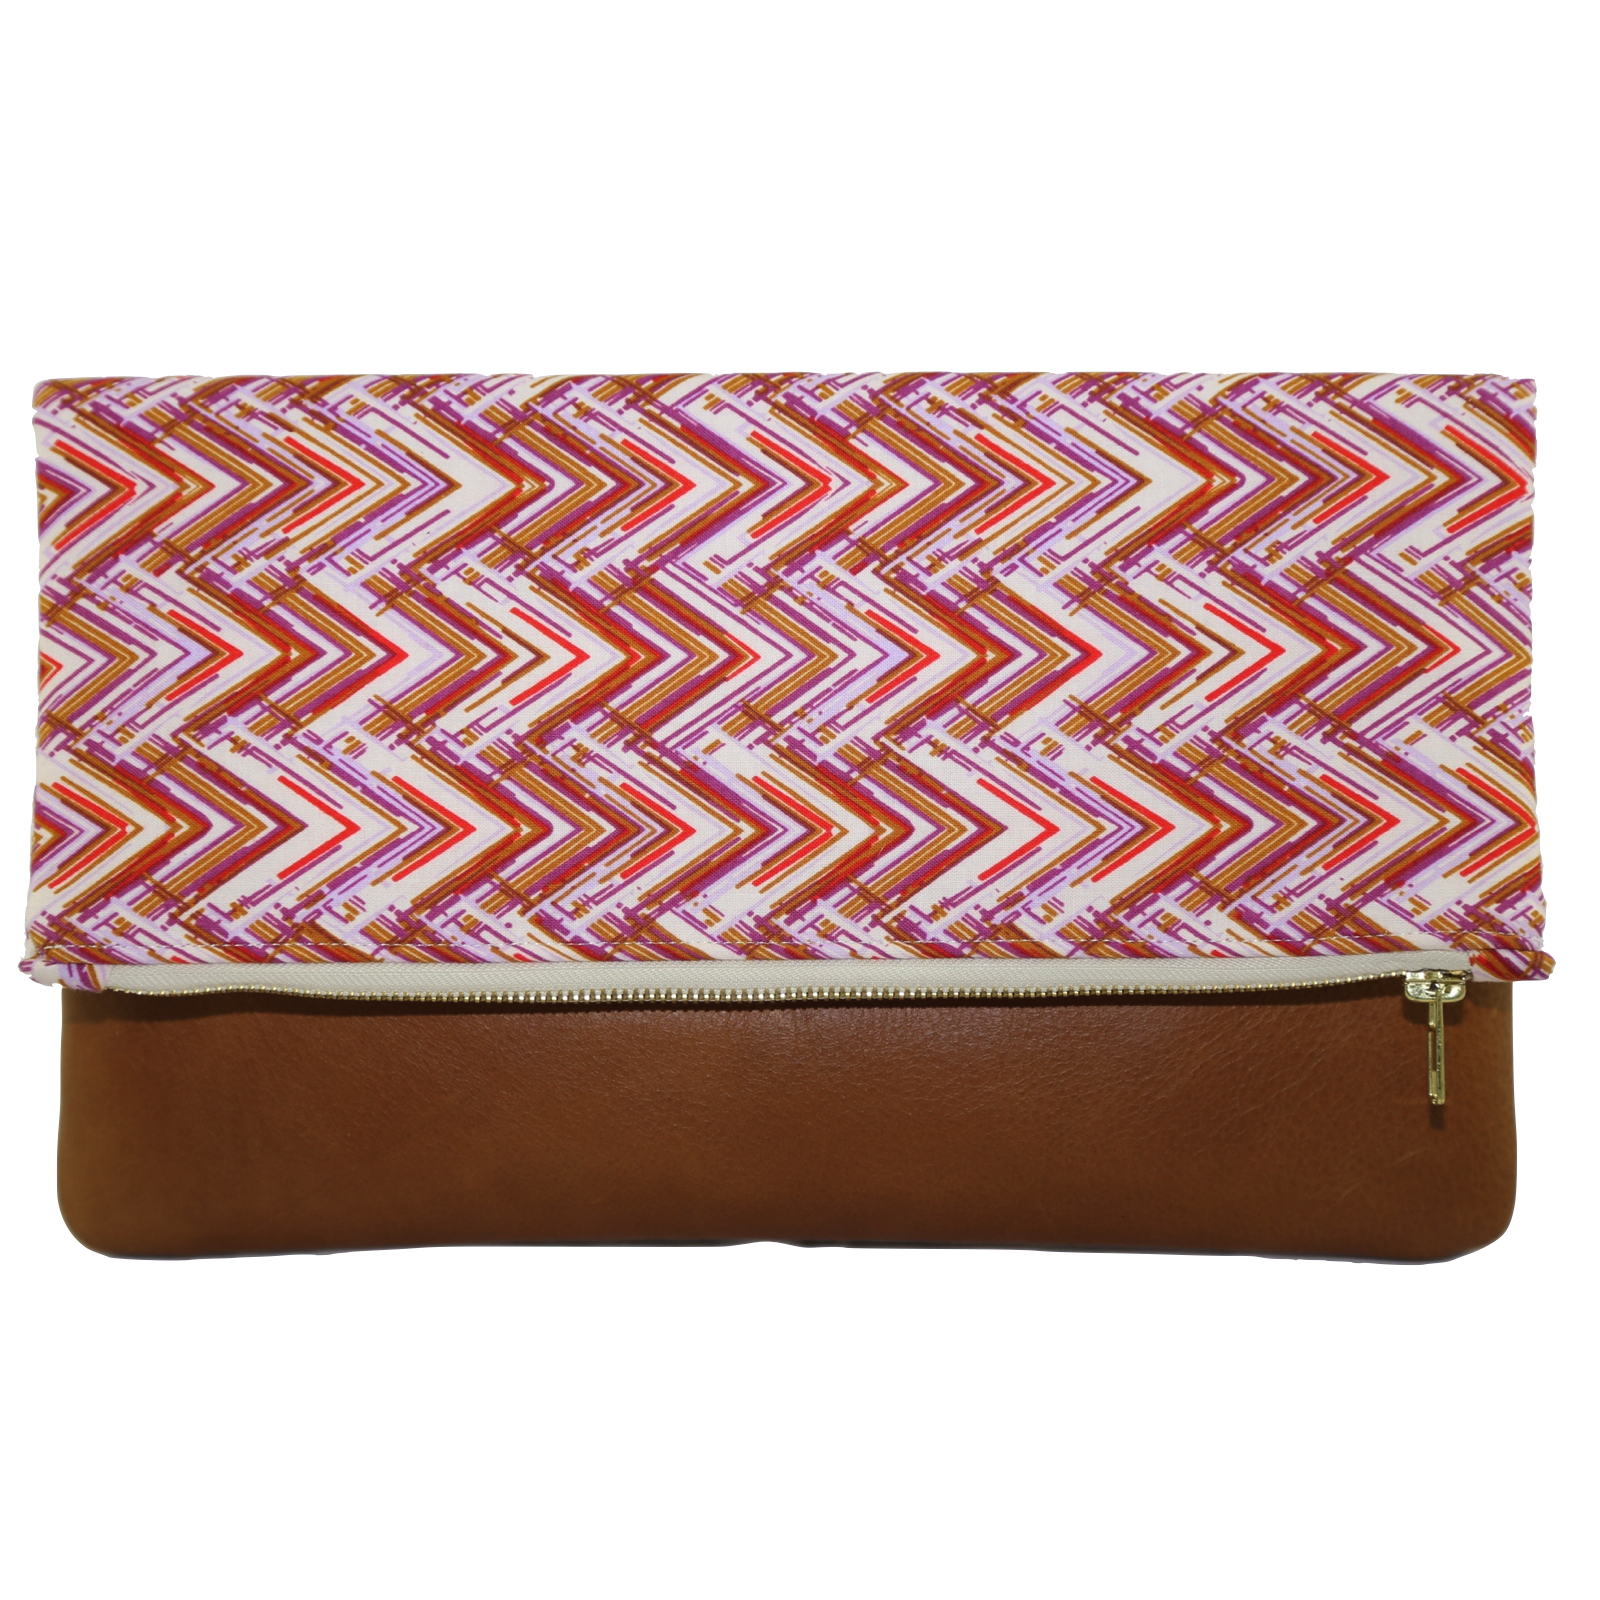 Foldover Zipper Clutch with Leather